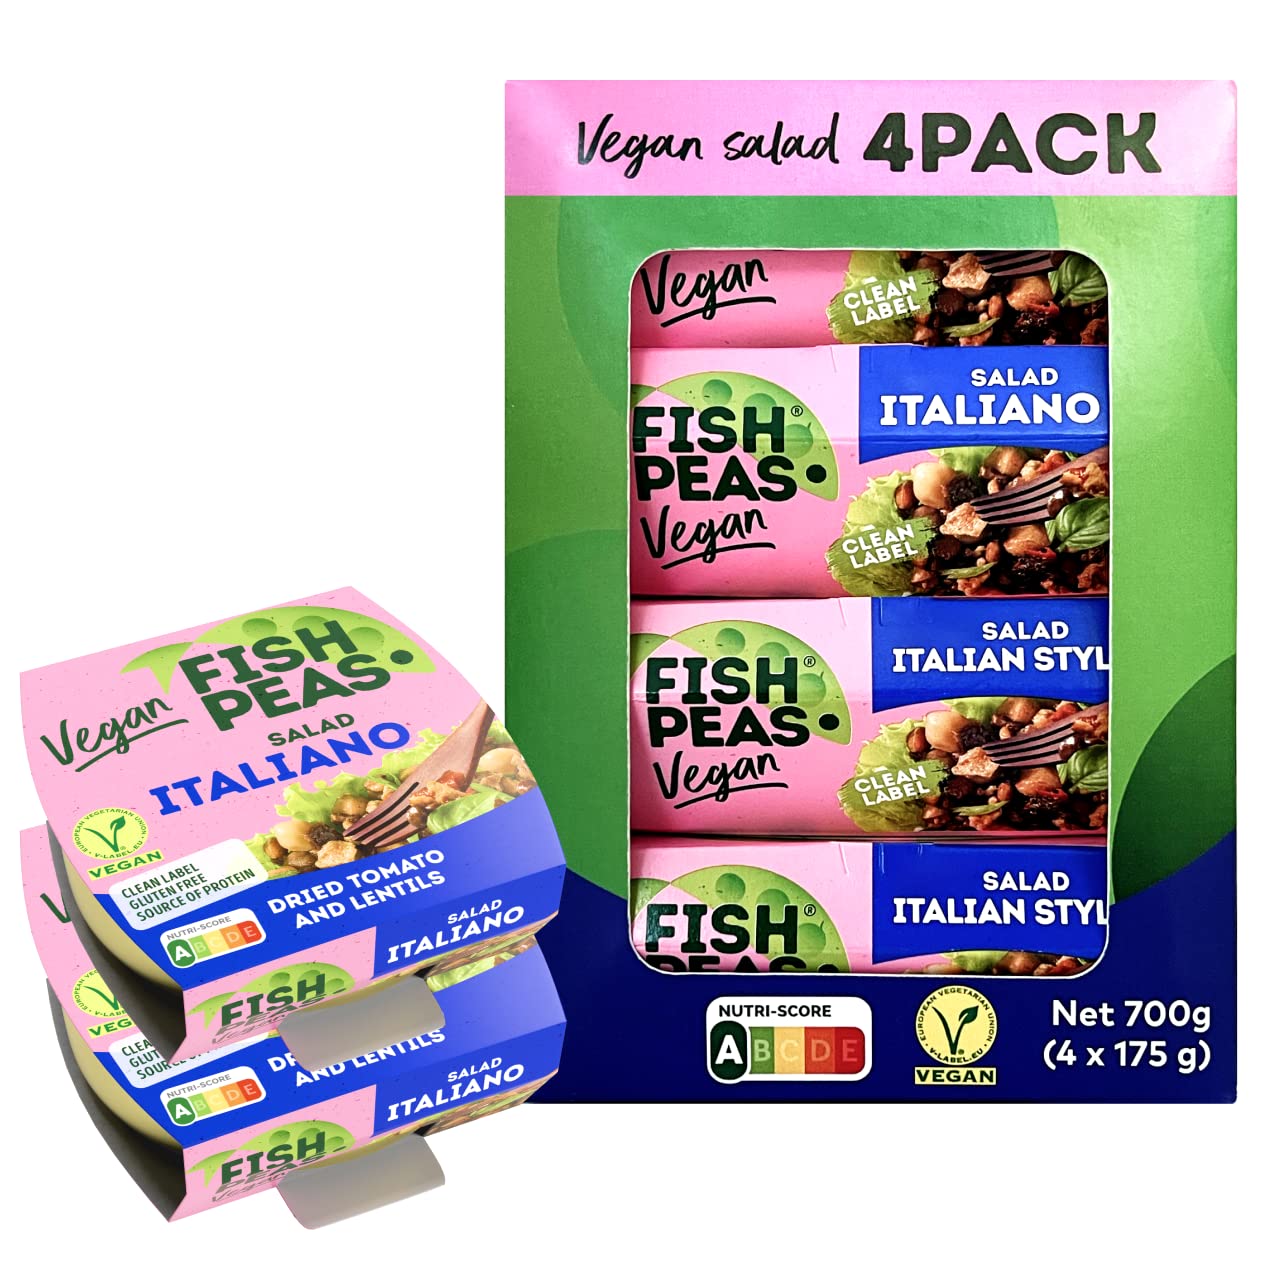 FISH PEAS - Plant Based Vegan Food ITALIANO Salad With Dried Tomato and Lentils. Plant Based Ready to Eat Meals, Gluten Free, Organic, Canned Vegan Meal Replacement - 175g (Pack of 4)